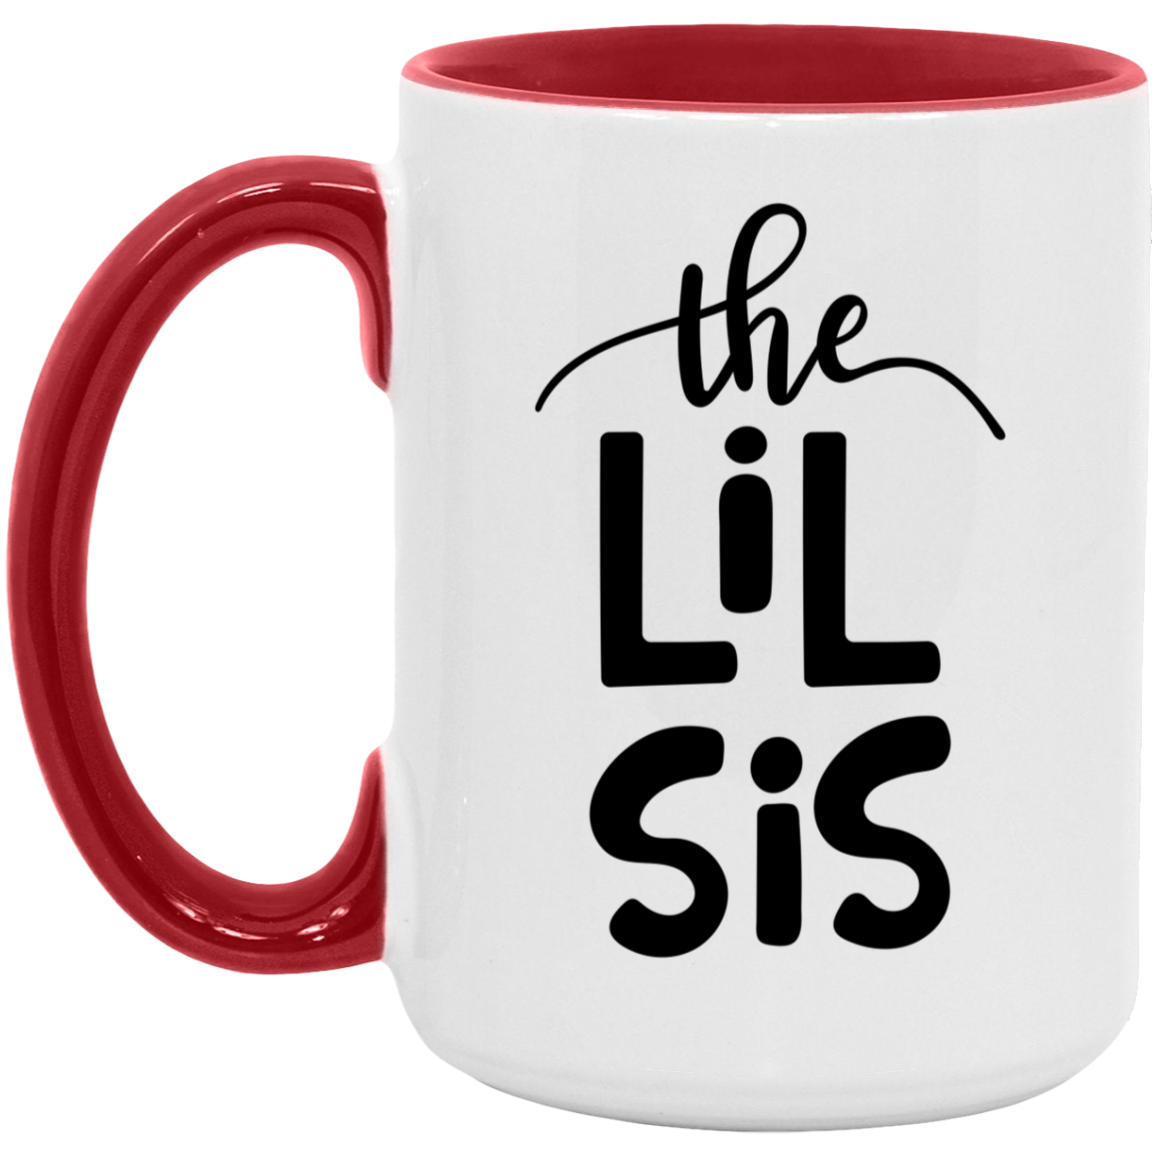 Lil Sis Mug Gift To Little Sister From Bother or Sister